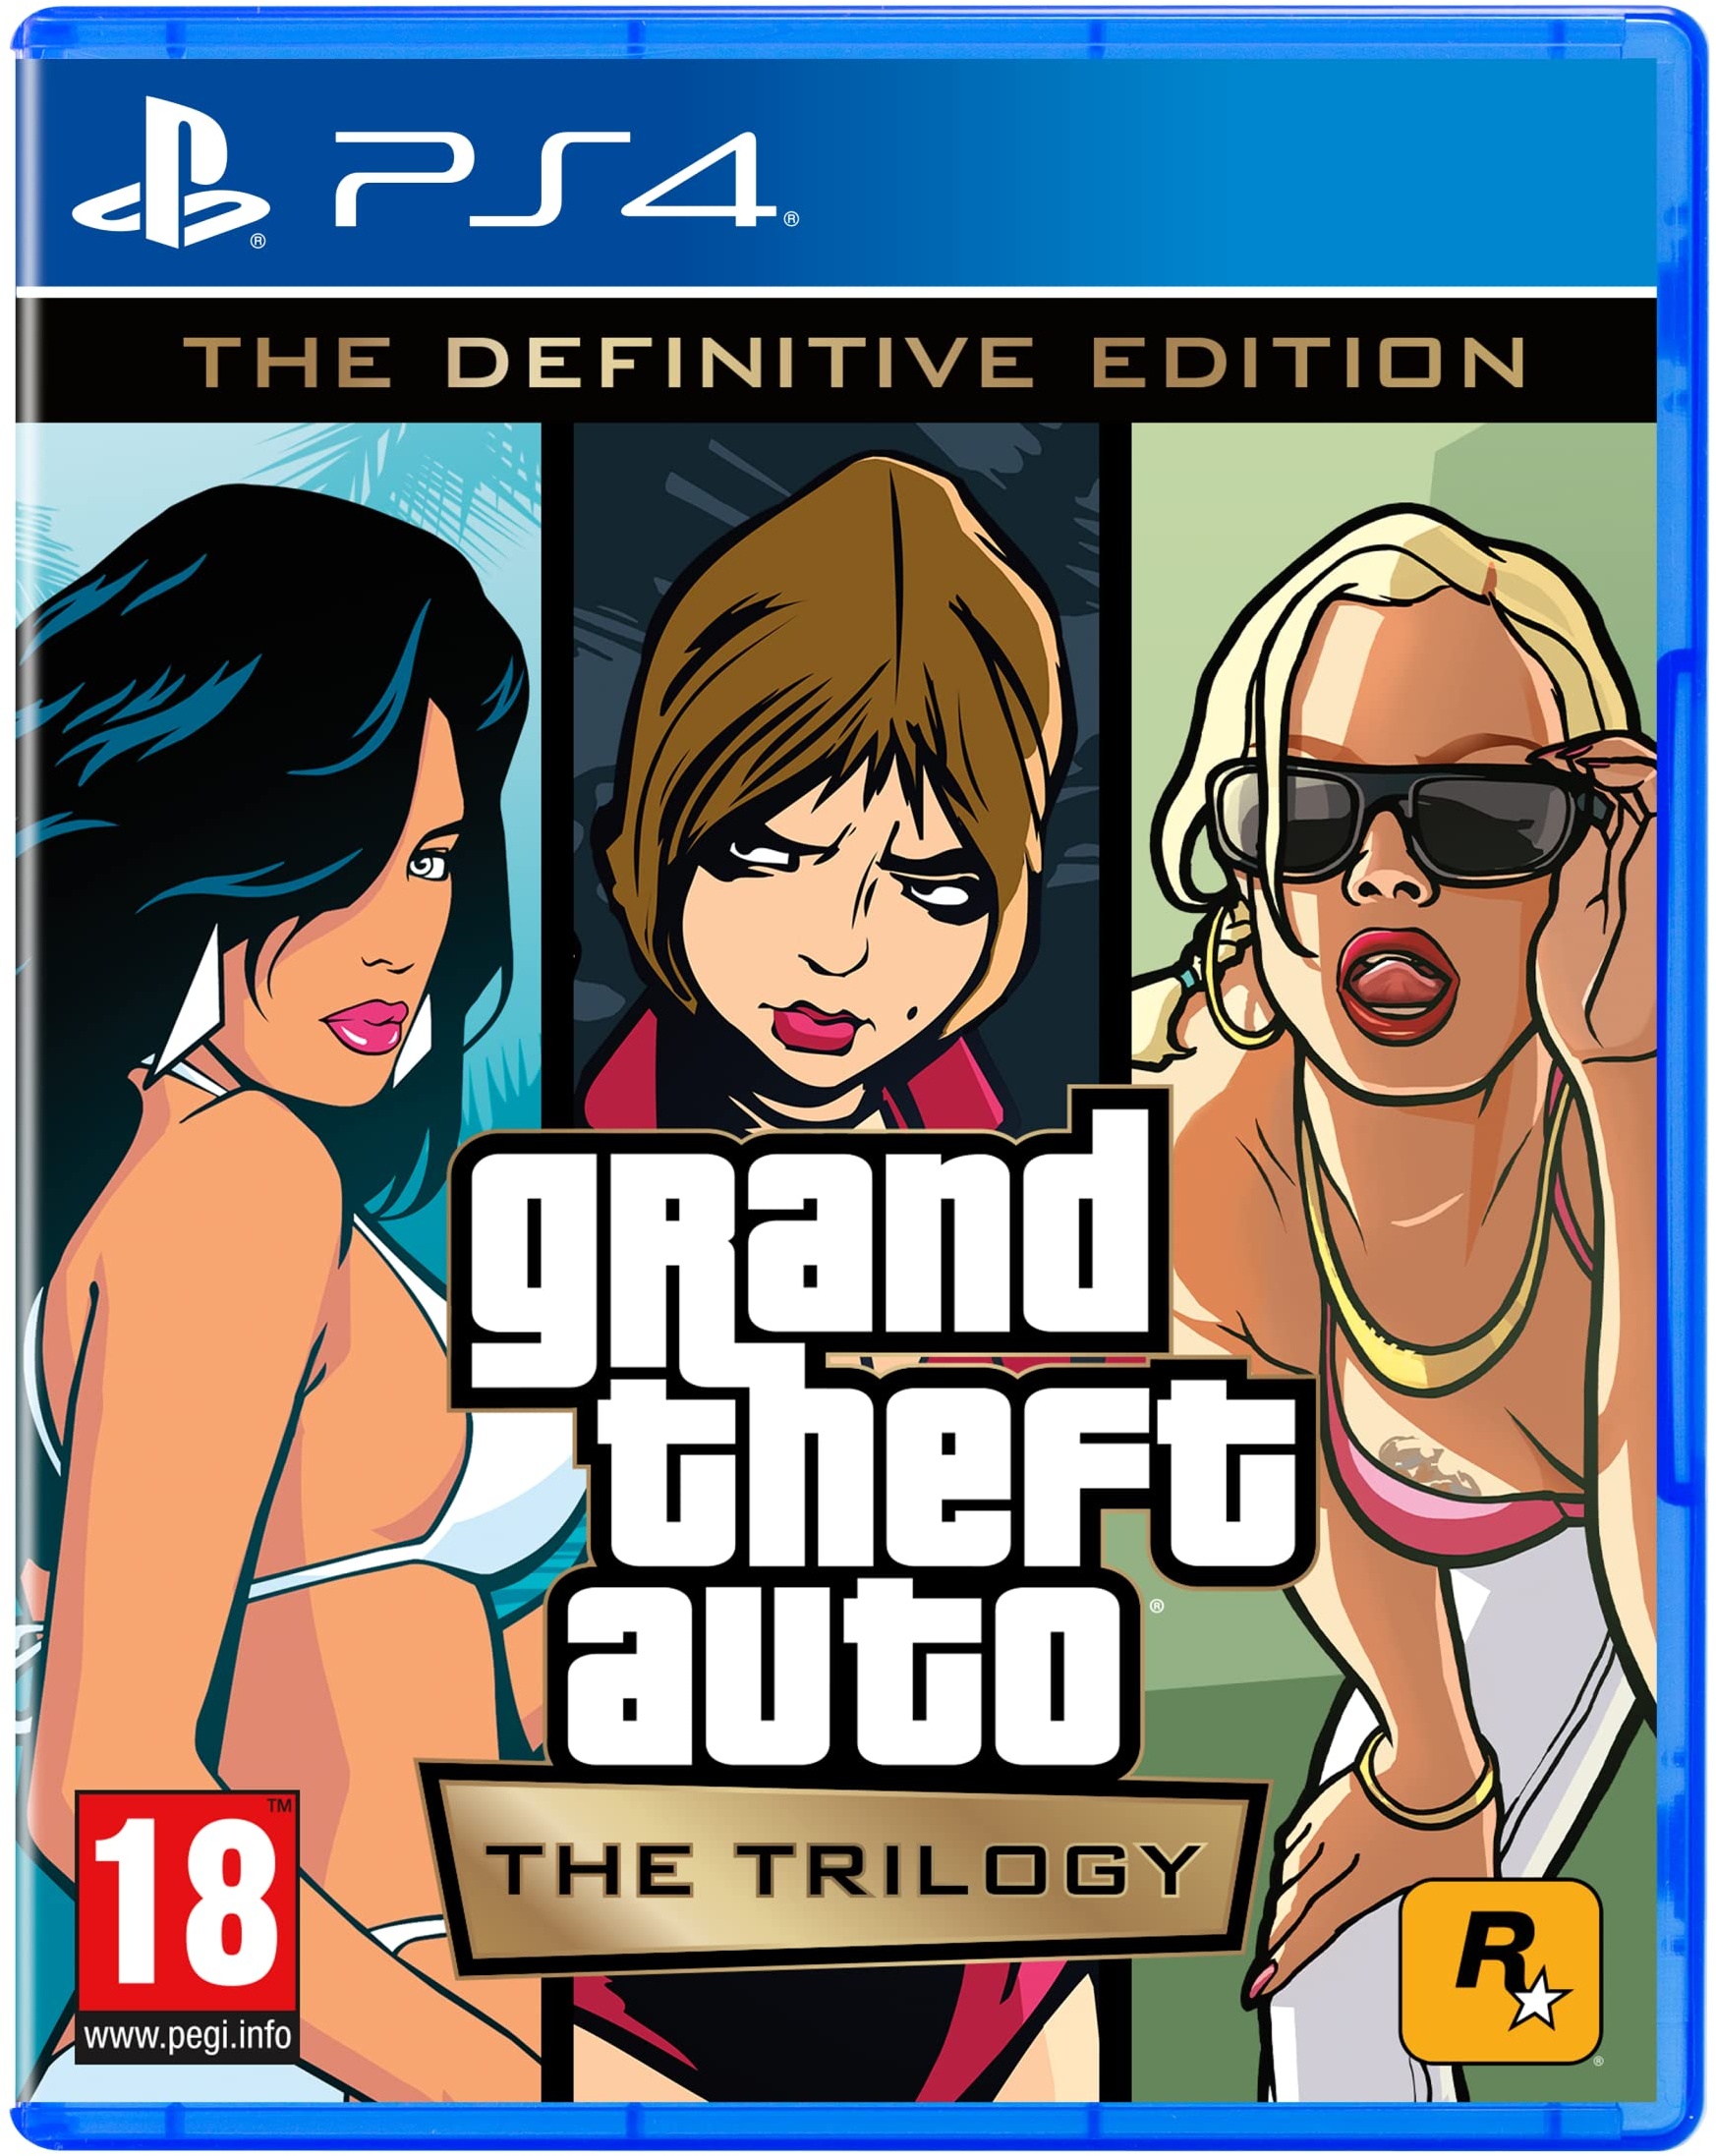 Grand Theft Auto: The Trilogy - The Definitive Edition PEGI [Playstation 4]